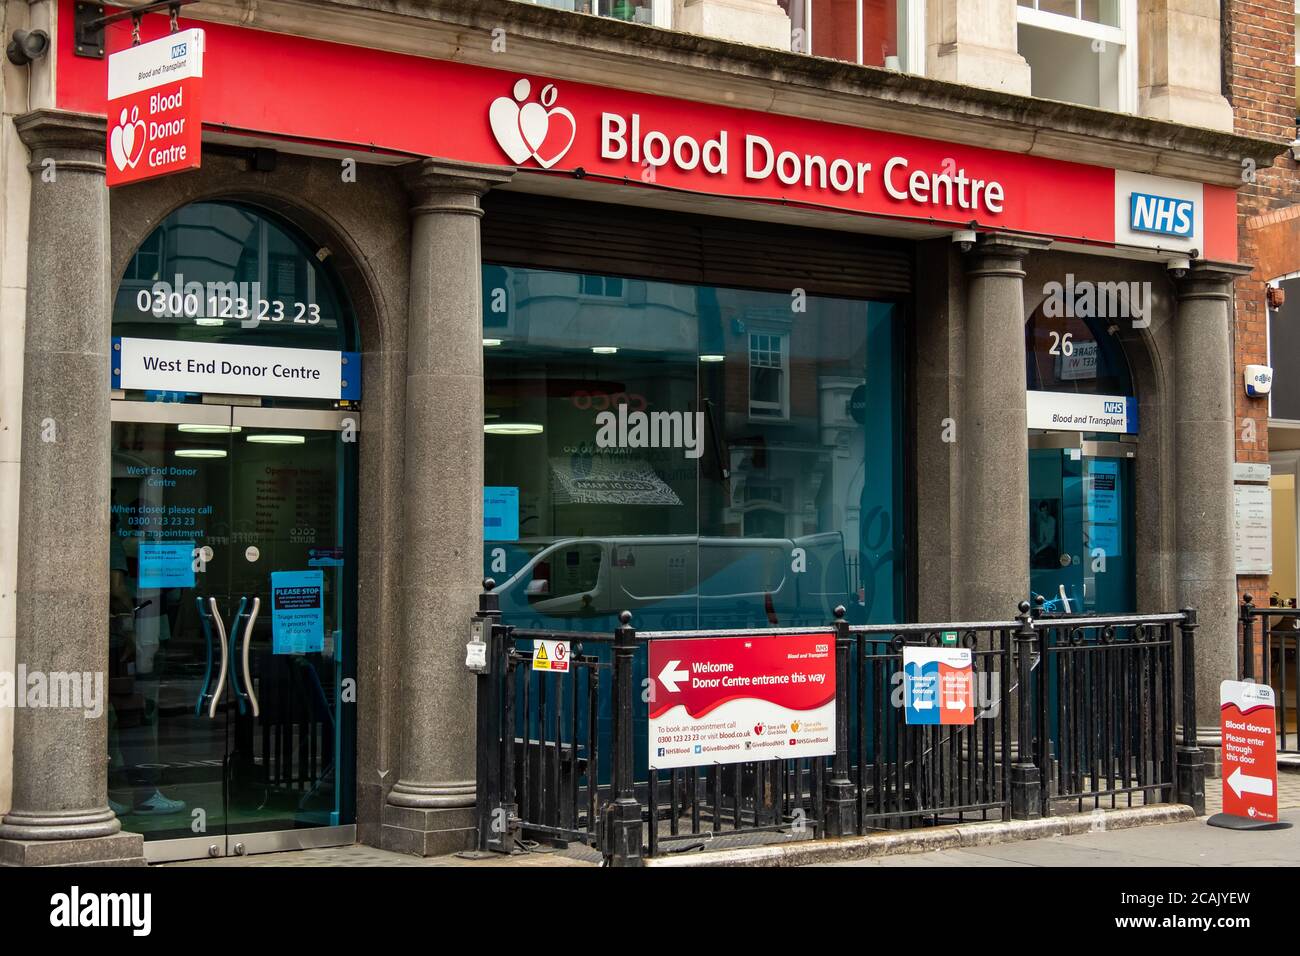 LONDON- NHS Blood and Transplant Blood Donor Centre, location among high street shops in central London Stock Photo